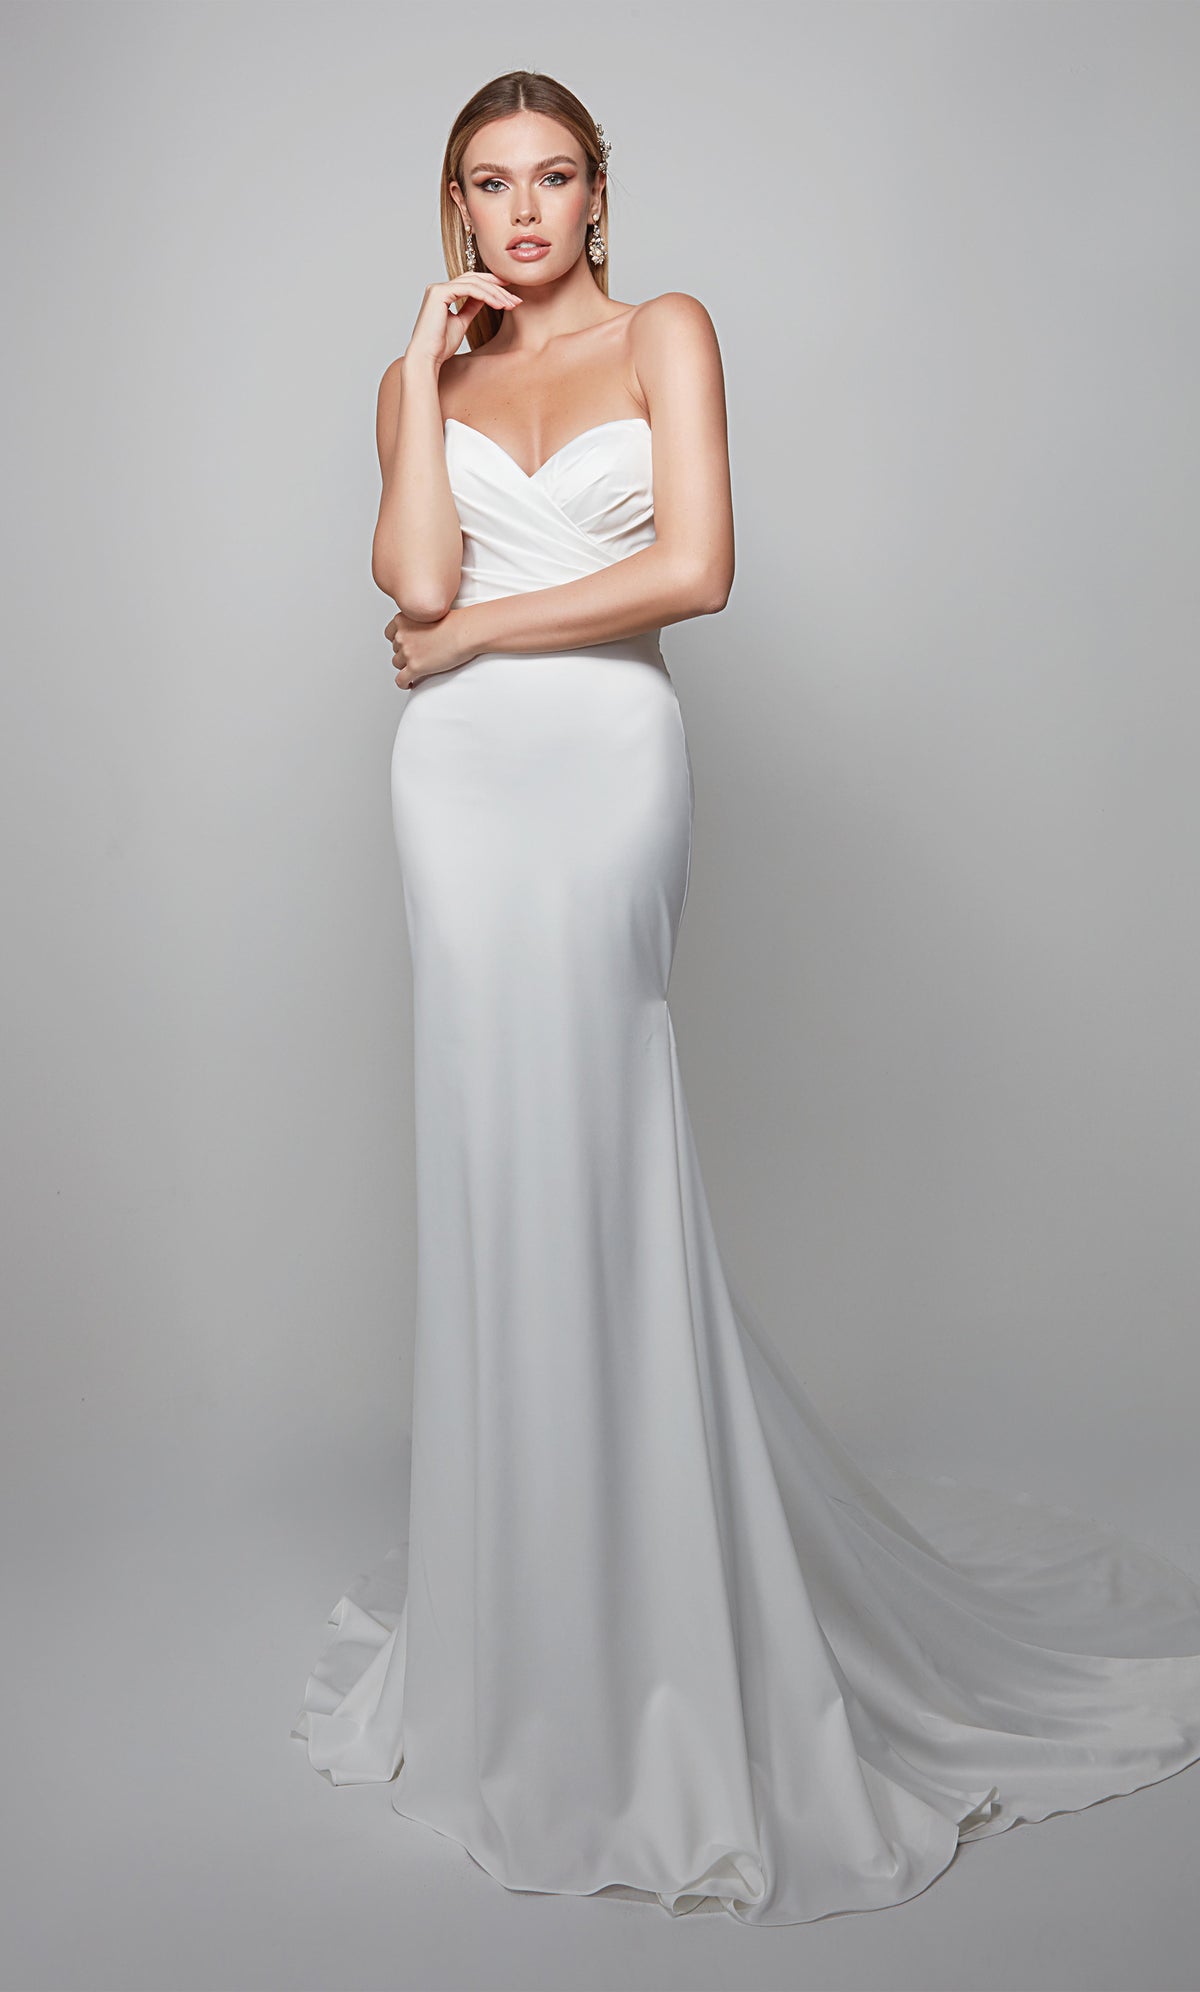 Strapless chic wedding dress with pleated bodice in white.